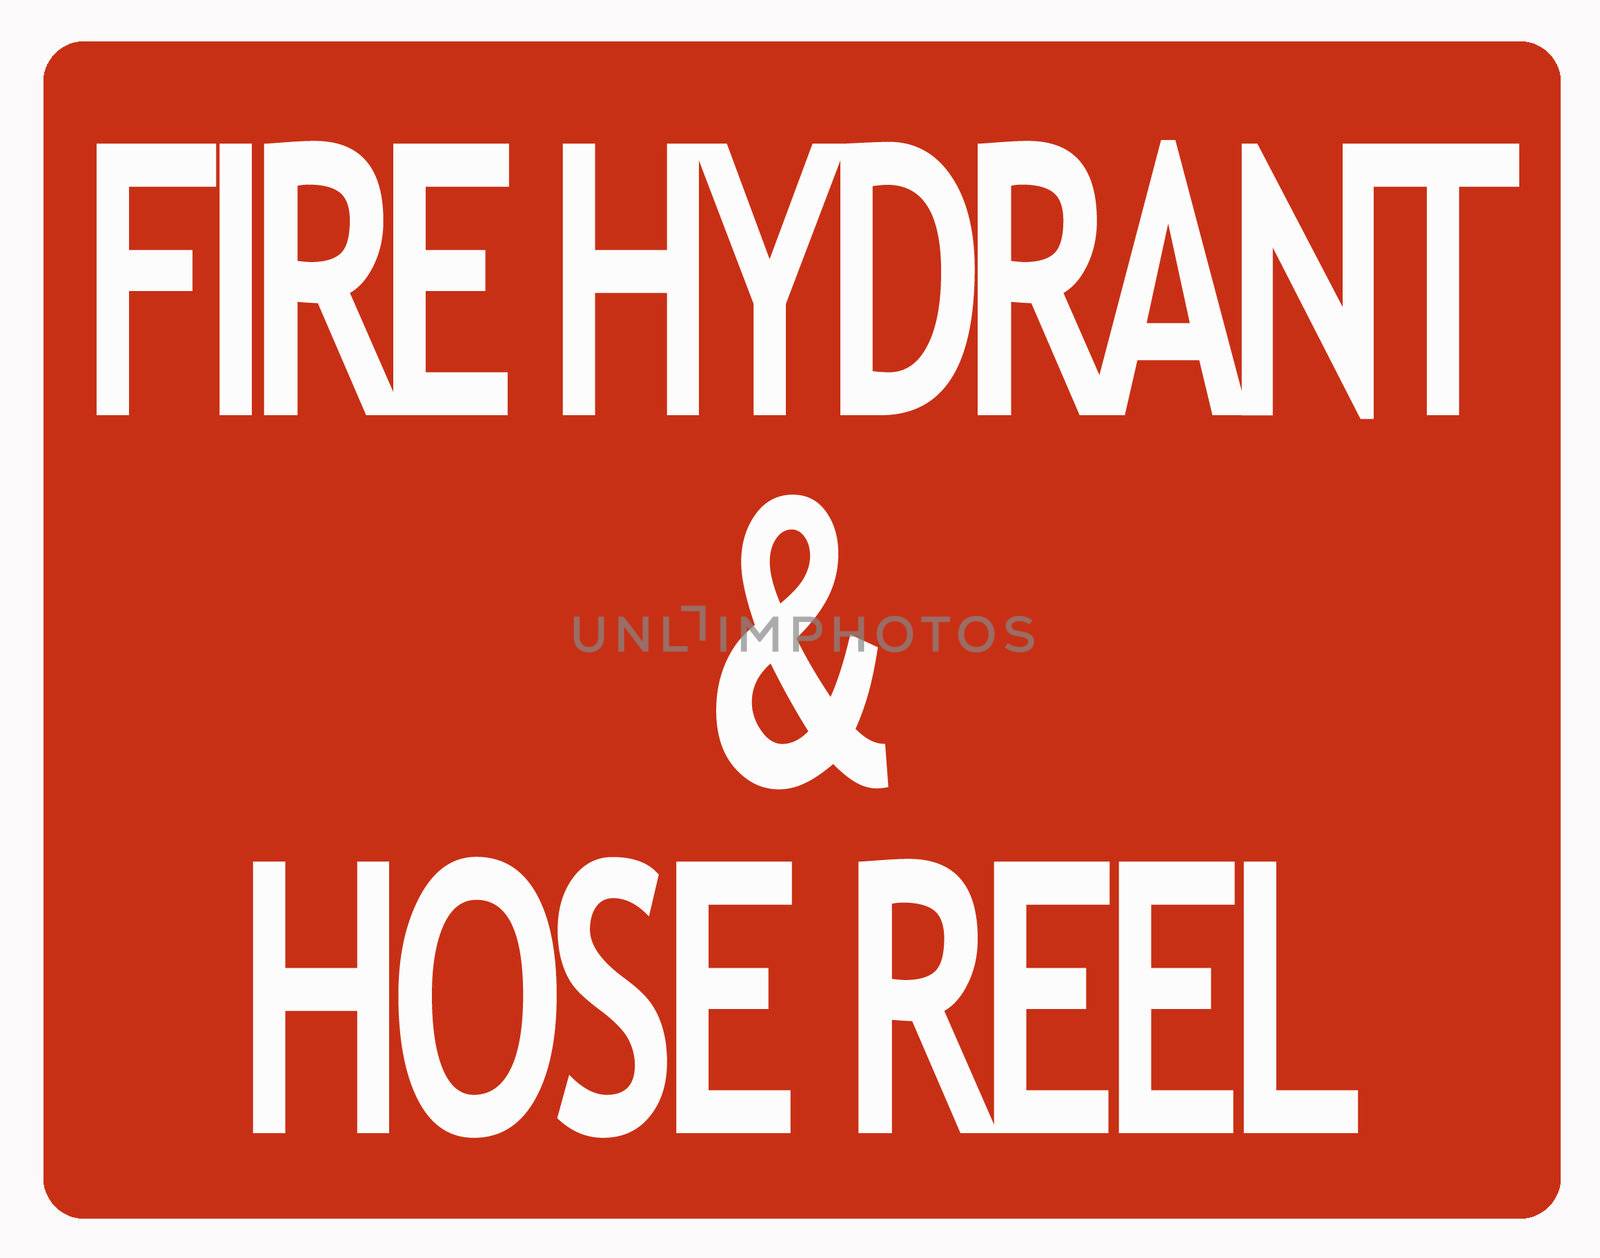 Fire hydrant sign by Claudine